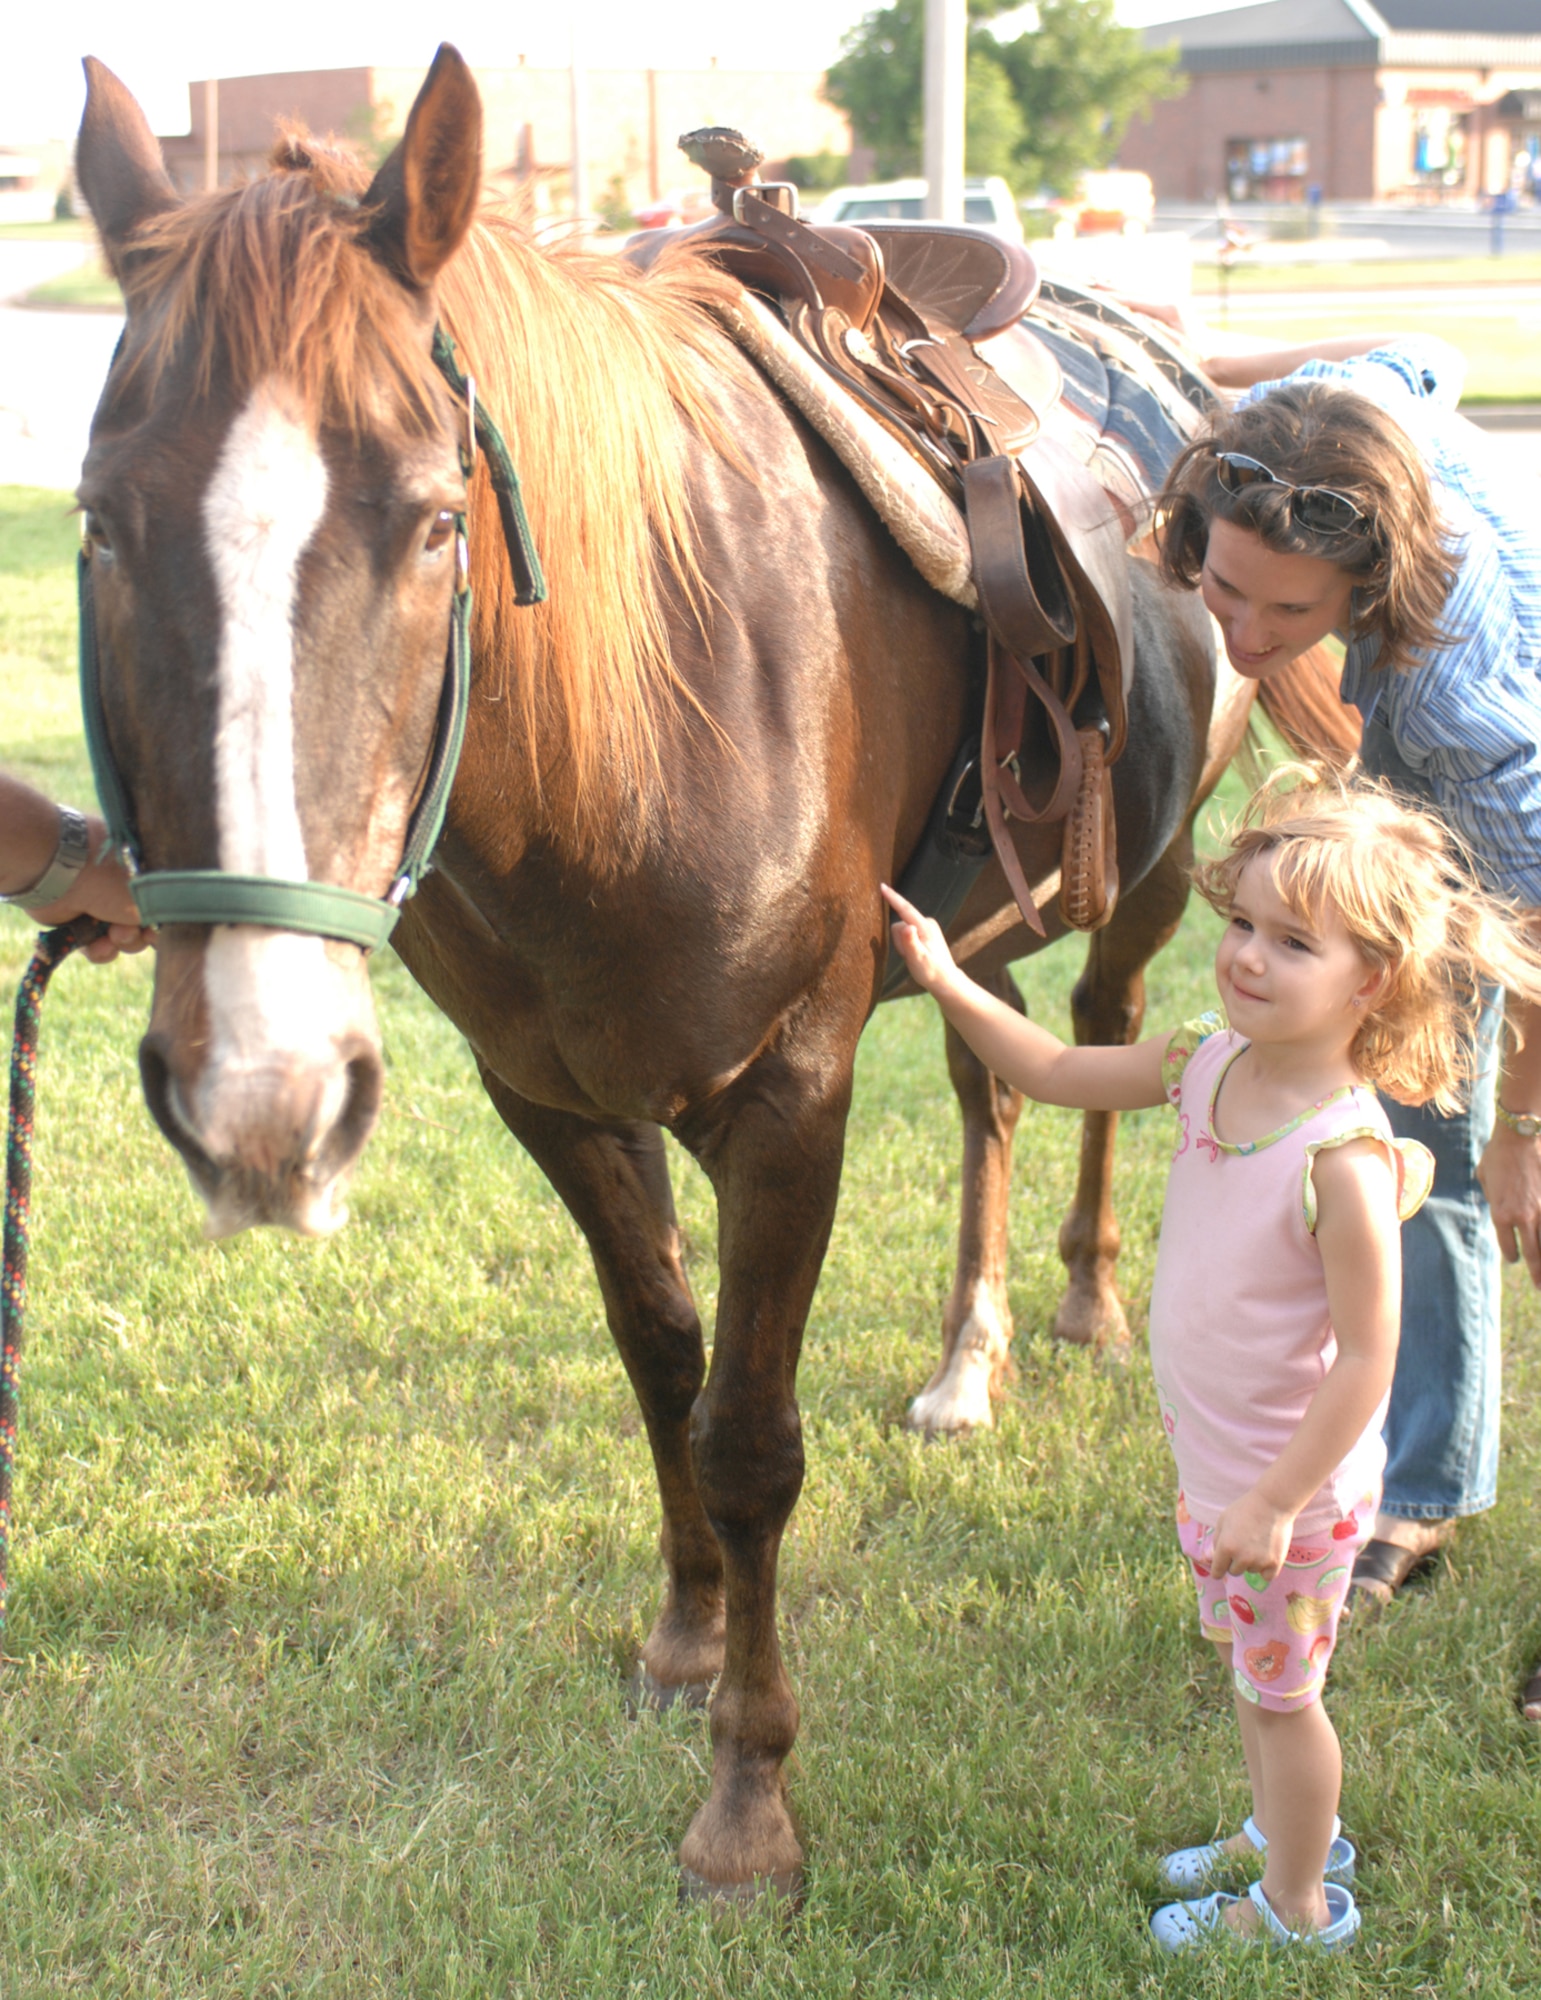 DYESS AIR FORCE BASE, Texas -- Jozsa Incorvaia and Chaplain (Capt.) Marianne Kehoe pet "Ram Rod" the horse during an activity at Vacation Bible School June 6. VBS is one week long, and every day the children learn a new lesson. (U.S. Air Force photo/Airman 1st Class Jennifer Romig)